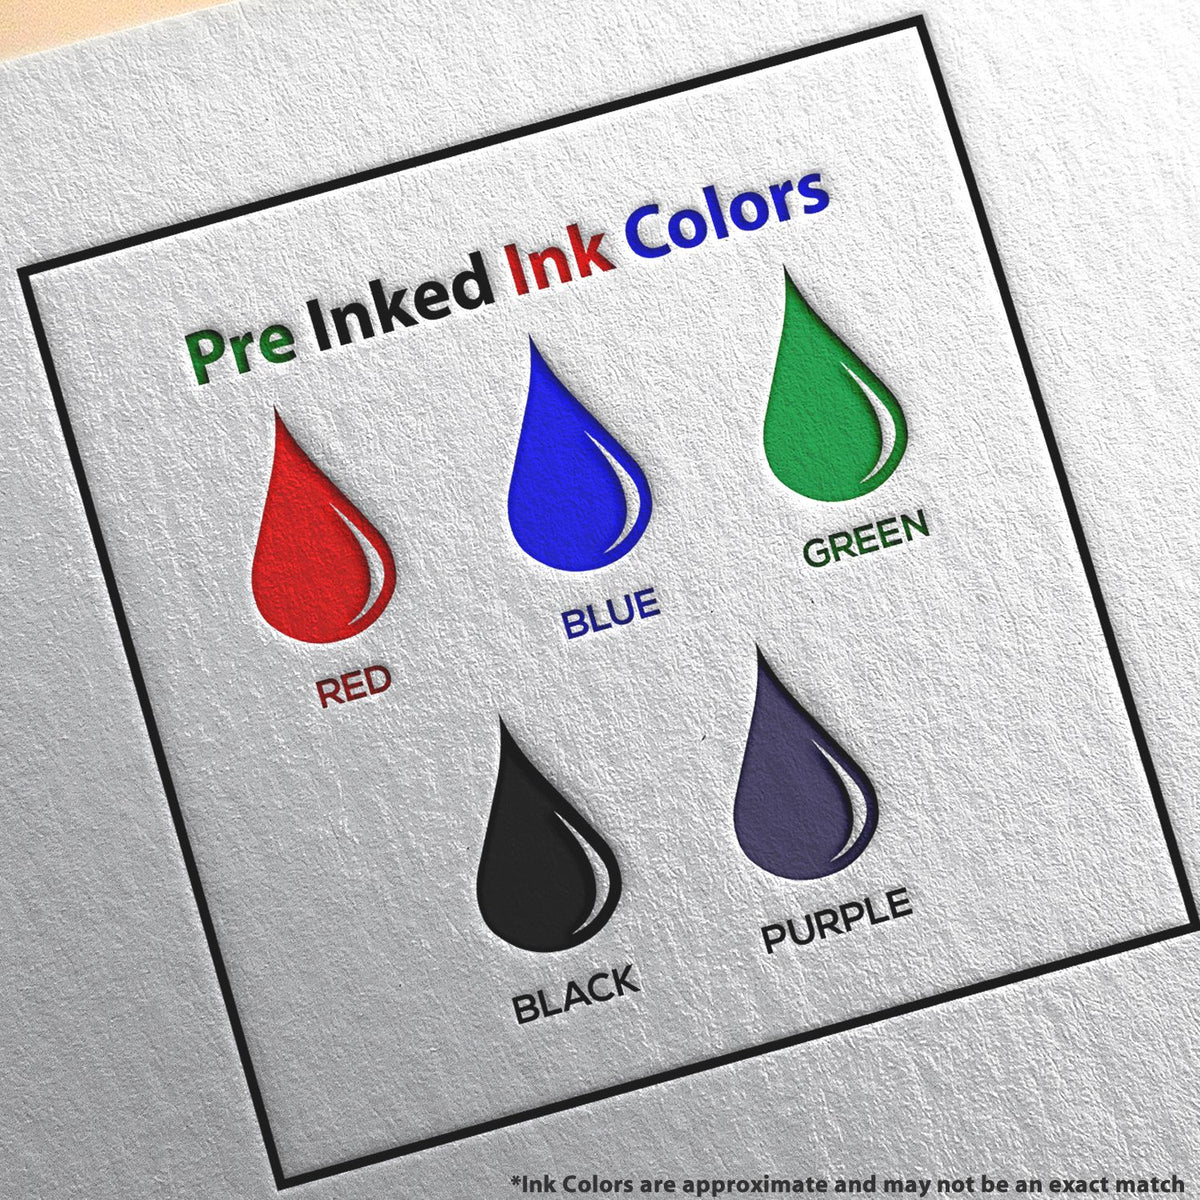 A picture showing the different ink colors or hues available for the Slim Pre-Inked Nevada Architect Seal Stamp product.